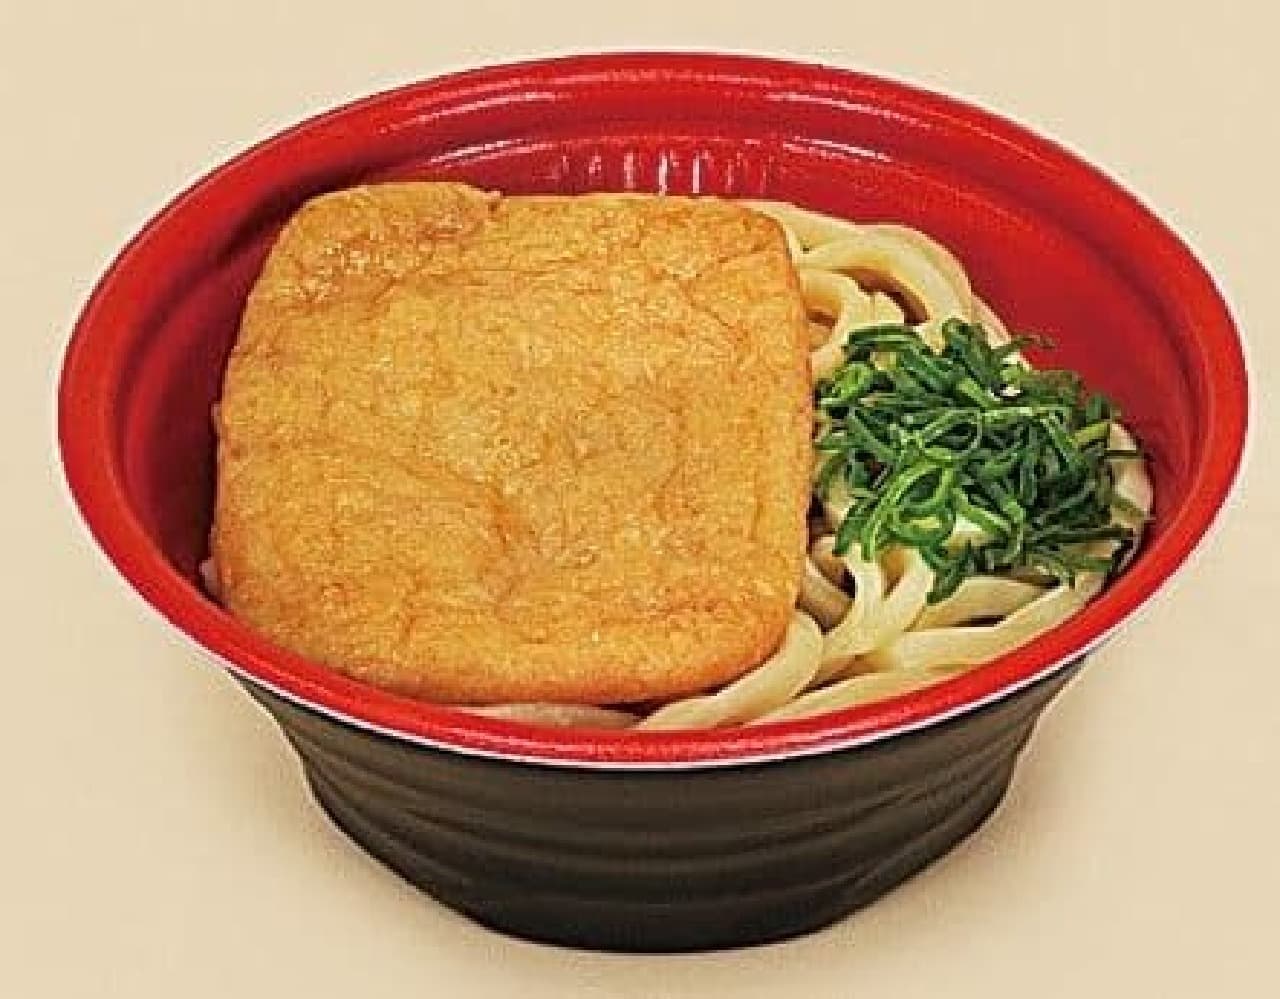 FamilyMart "Katsune Udon cooked in a kettle"